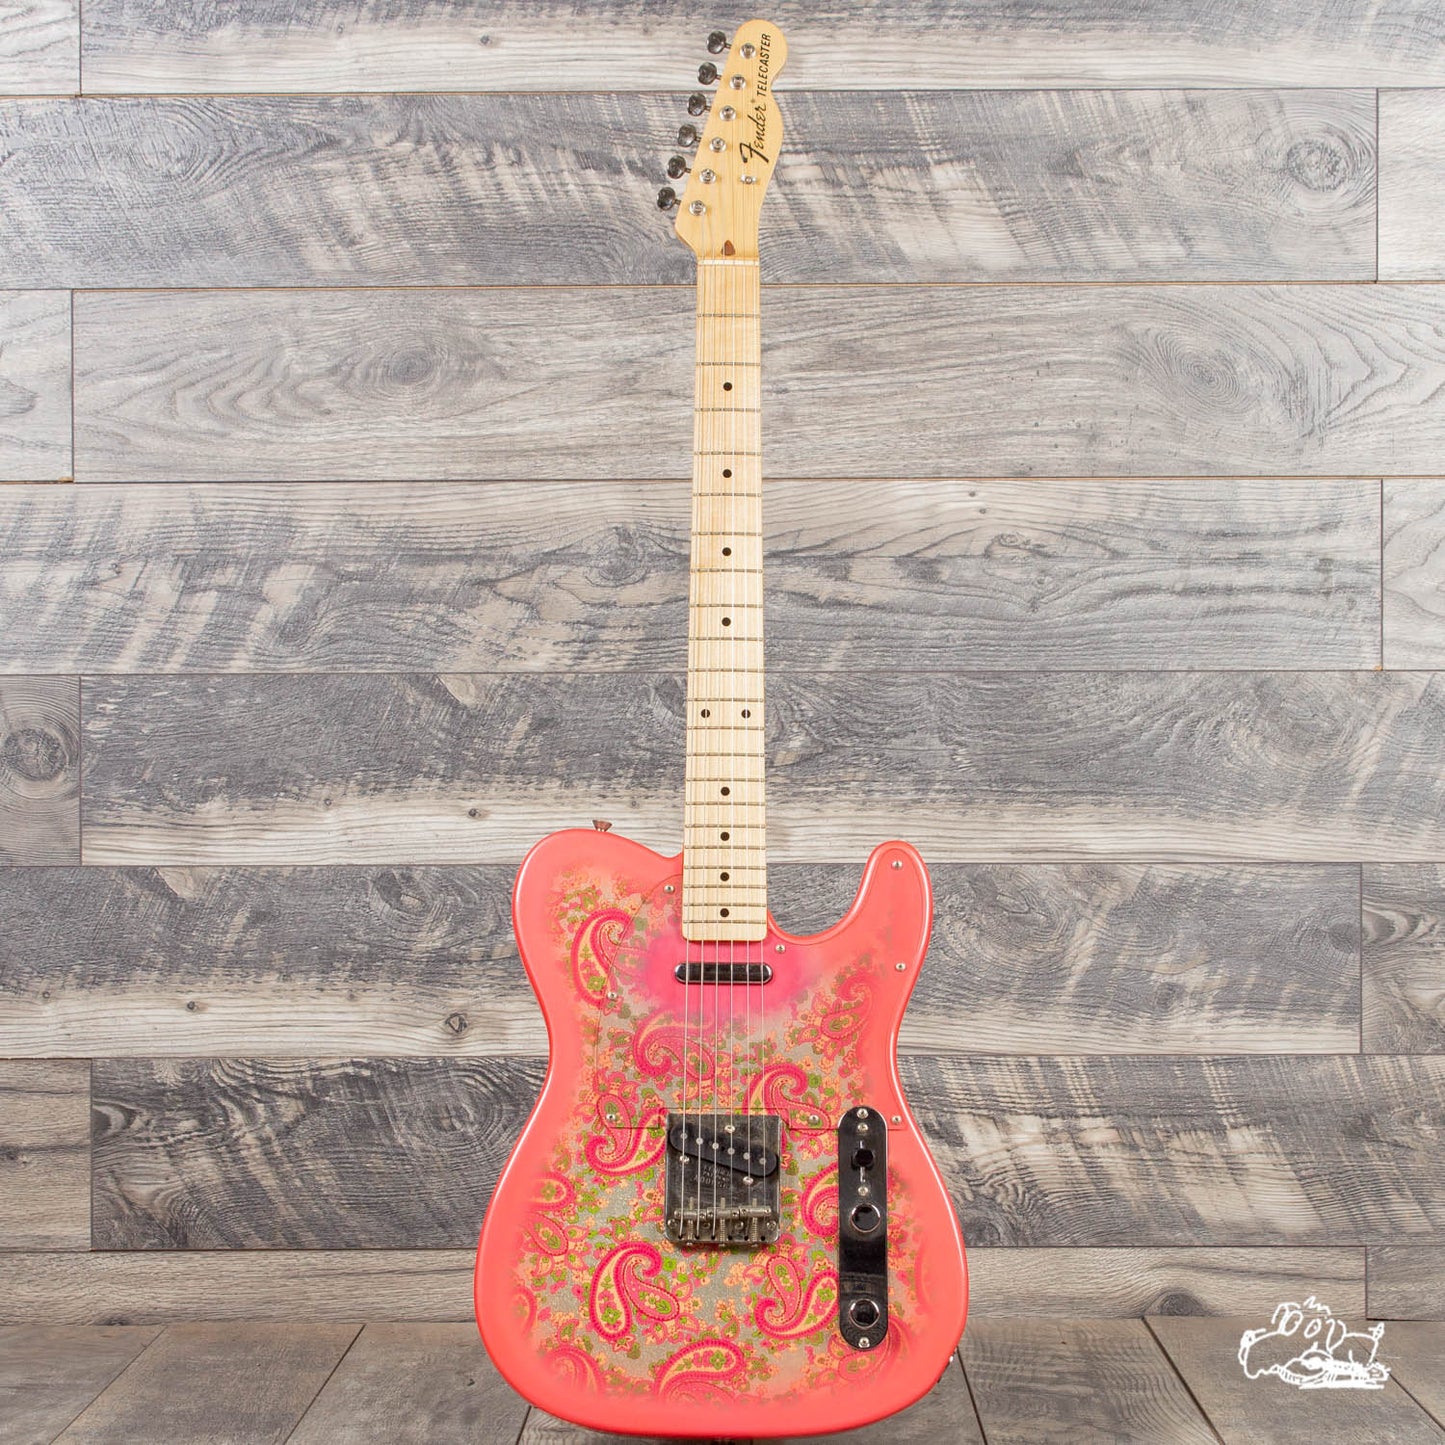 1999 Fender Telecaster - Paisley - Crafted in Japan